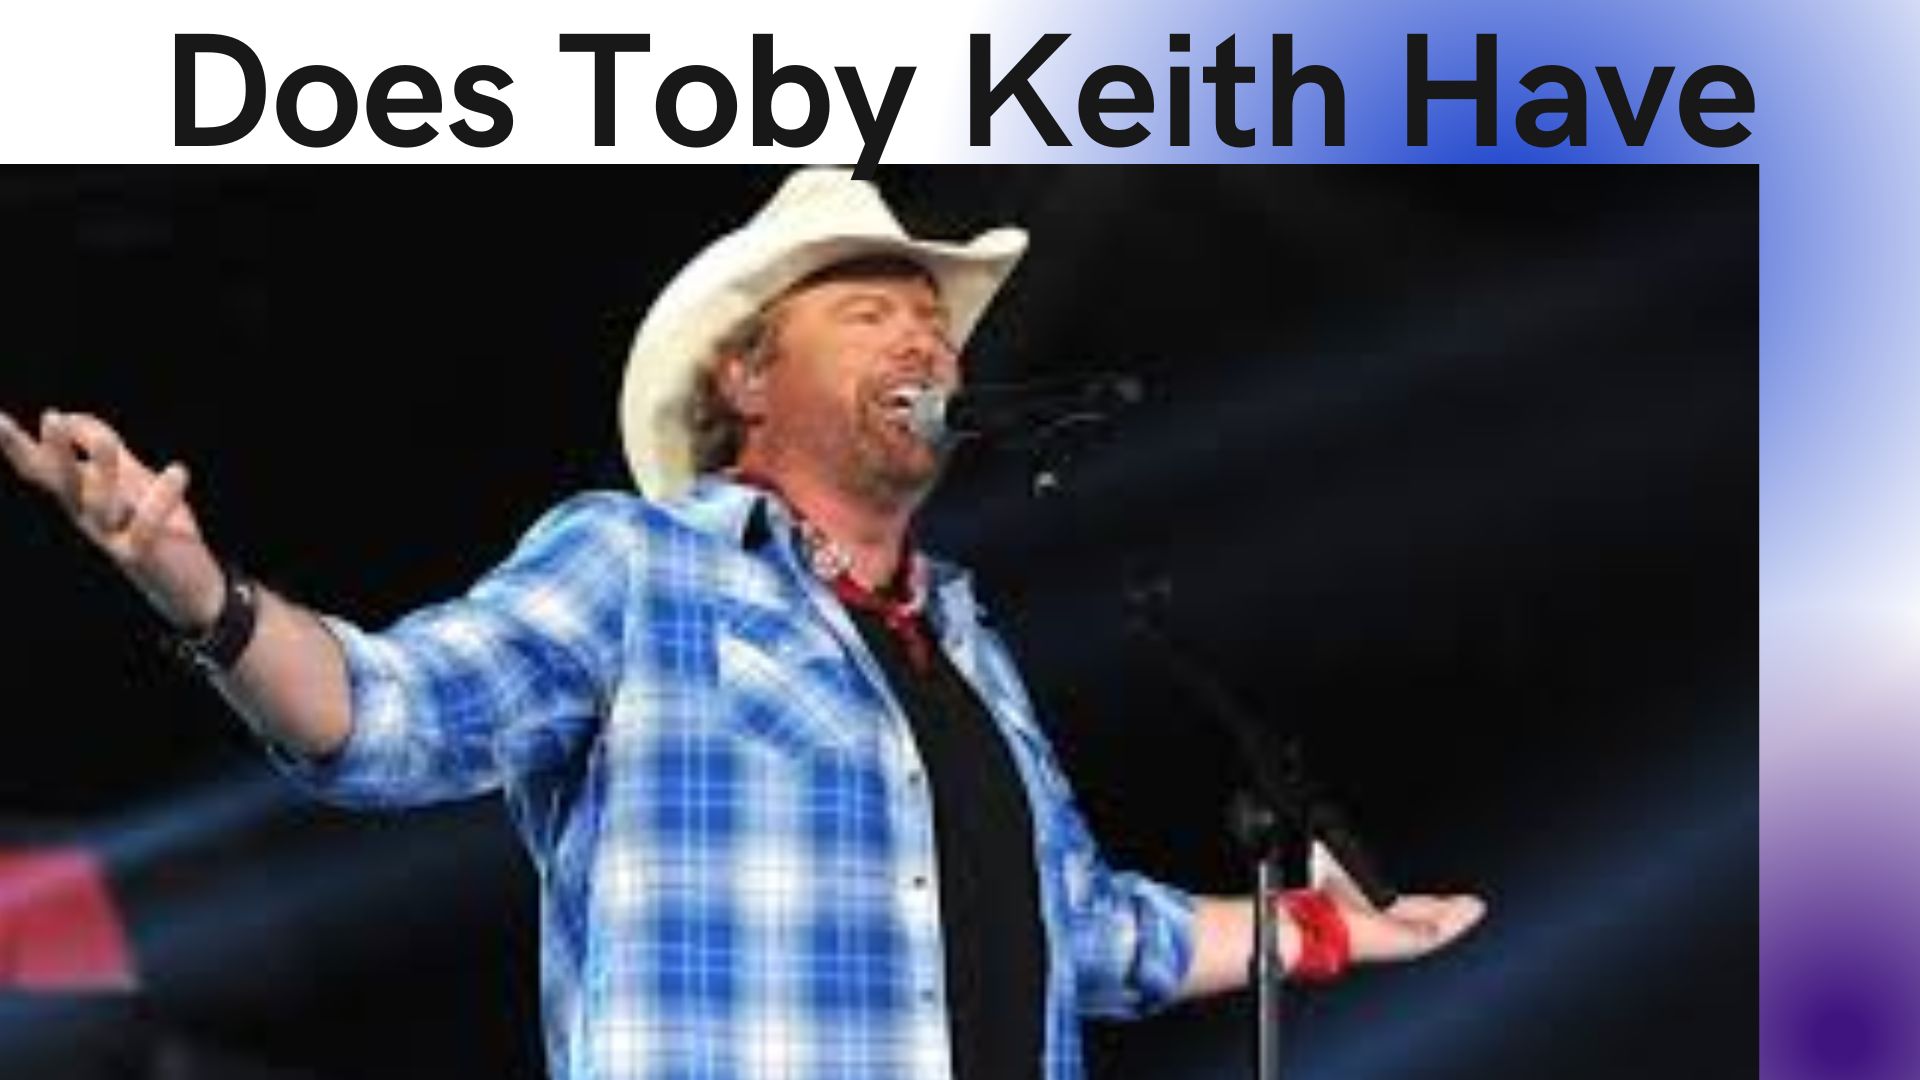 Does Toby Keith Have June 2022 Find Essential Details!